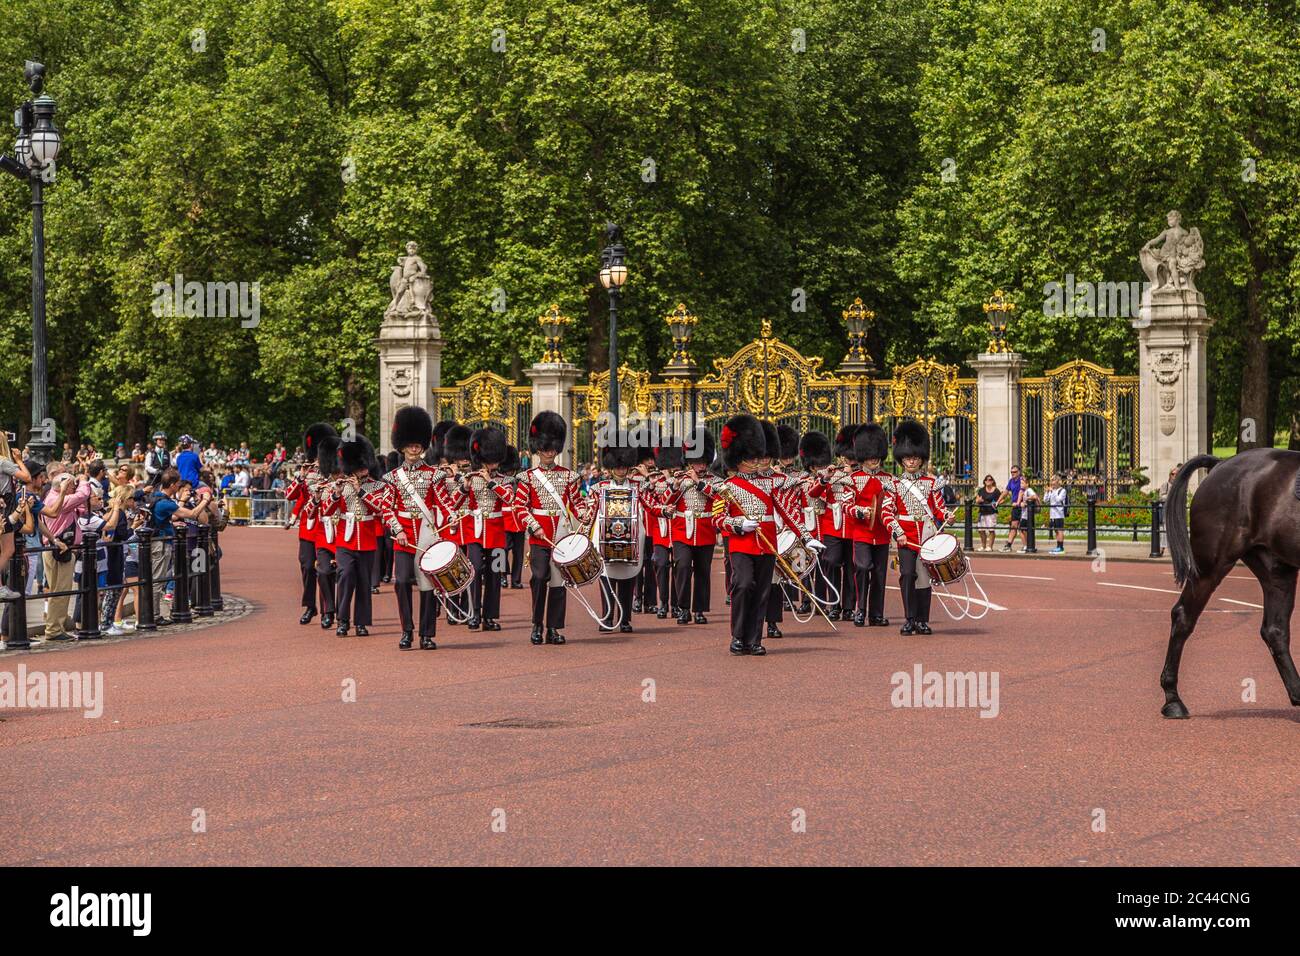 LONDON, UK - 28TH JUNE 2016:  Musicians at the Changing of the Guard Performance at Buckingham Palace in the summer. A police escort can be seen. Stock Photo